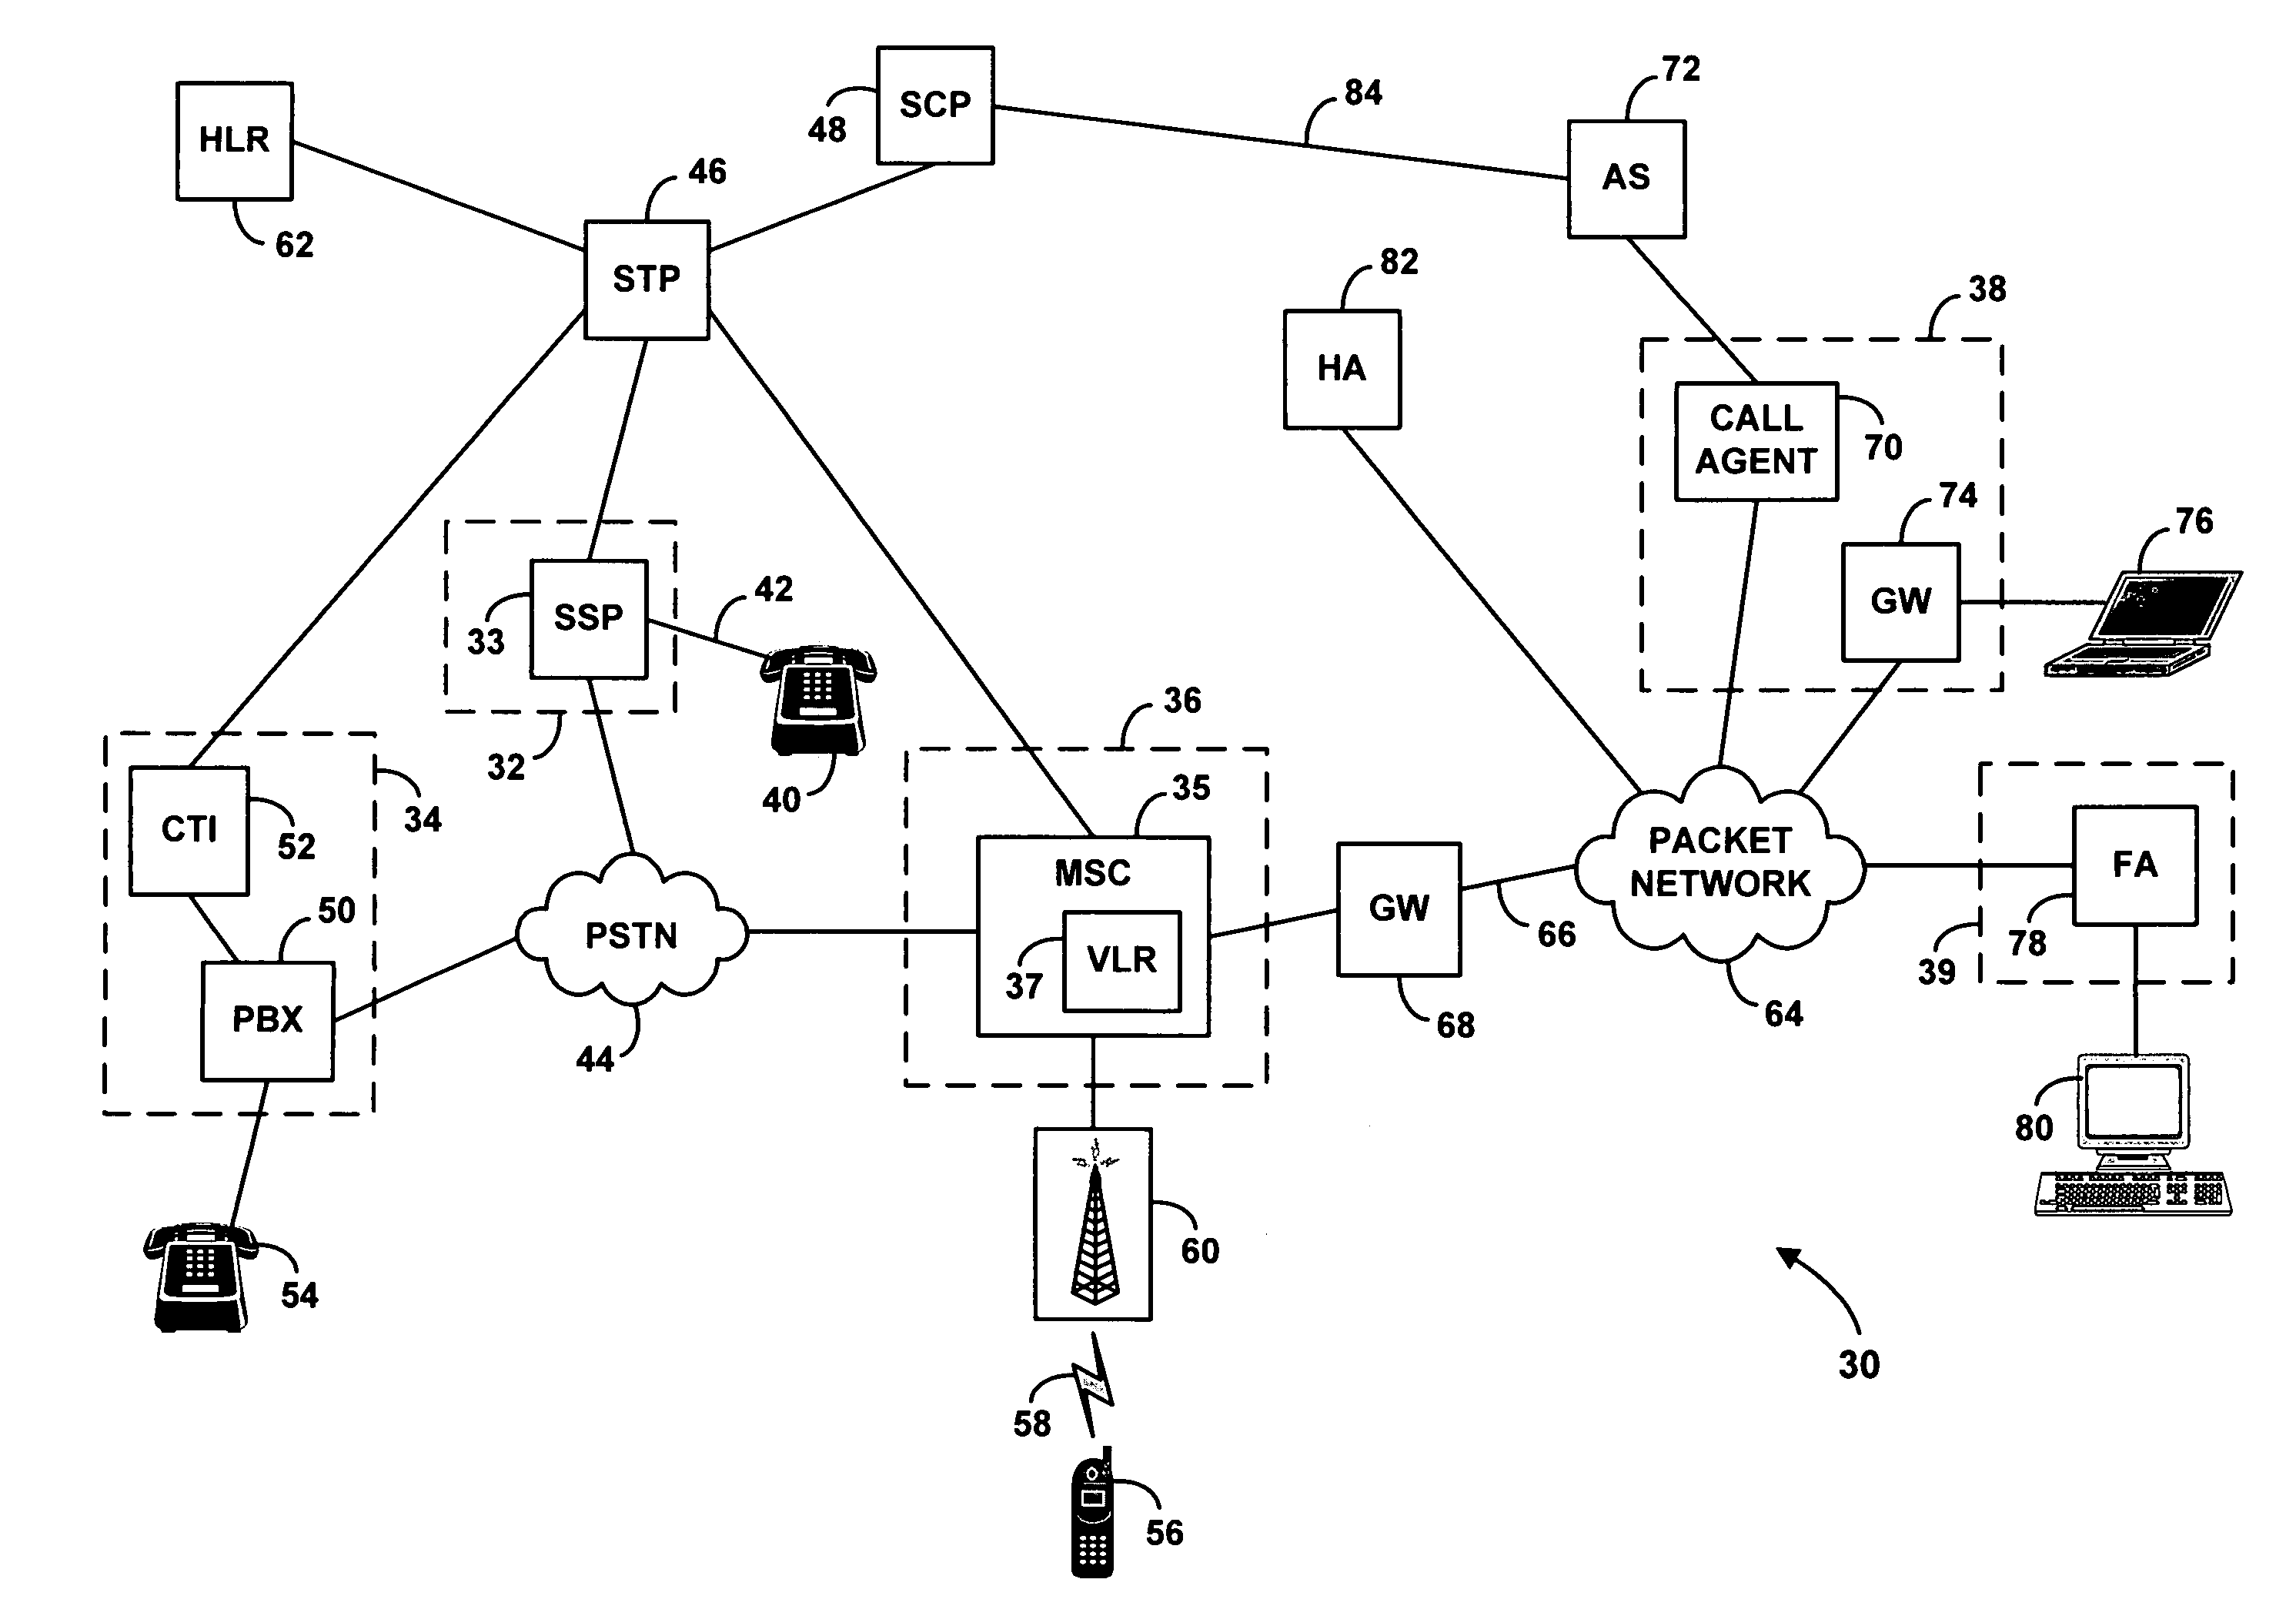 System for controlled provisioning of telecommunications services